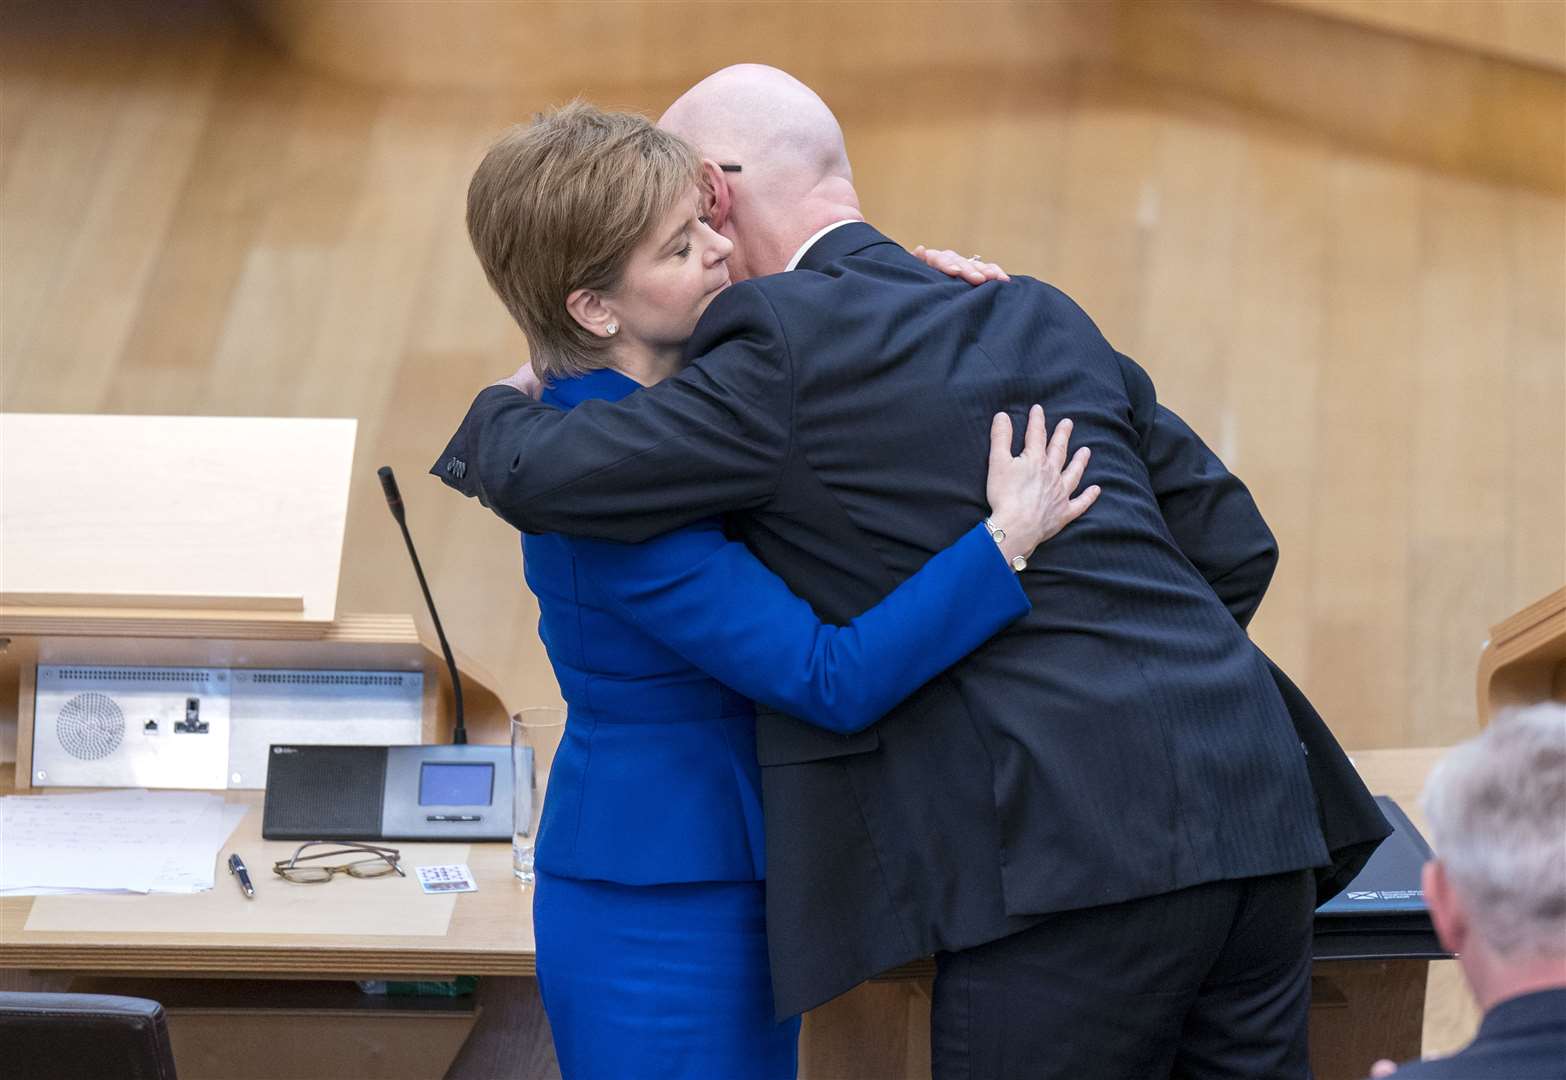 Nicola Sturgeon and John Swinney embraced at the end of her final session of First Minister’s Questions on Thursday (Jane Barlow/PA)